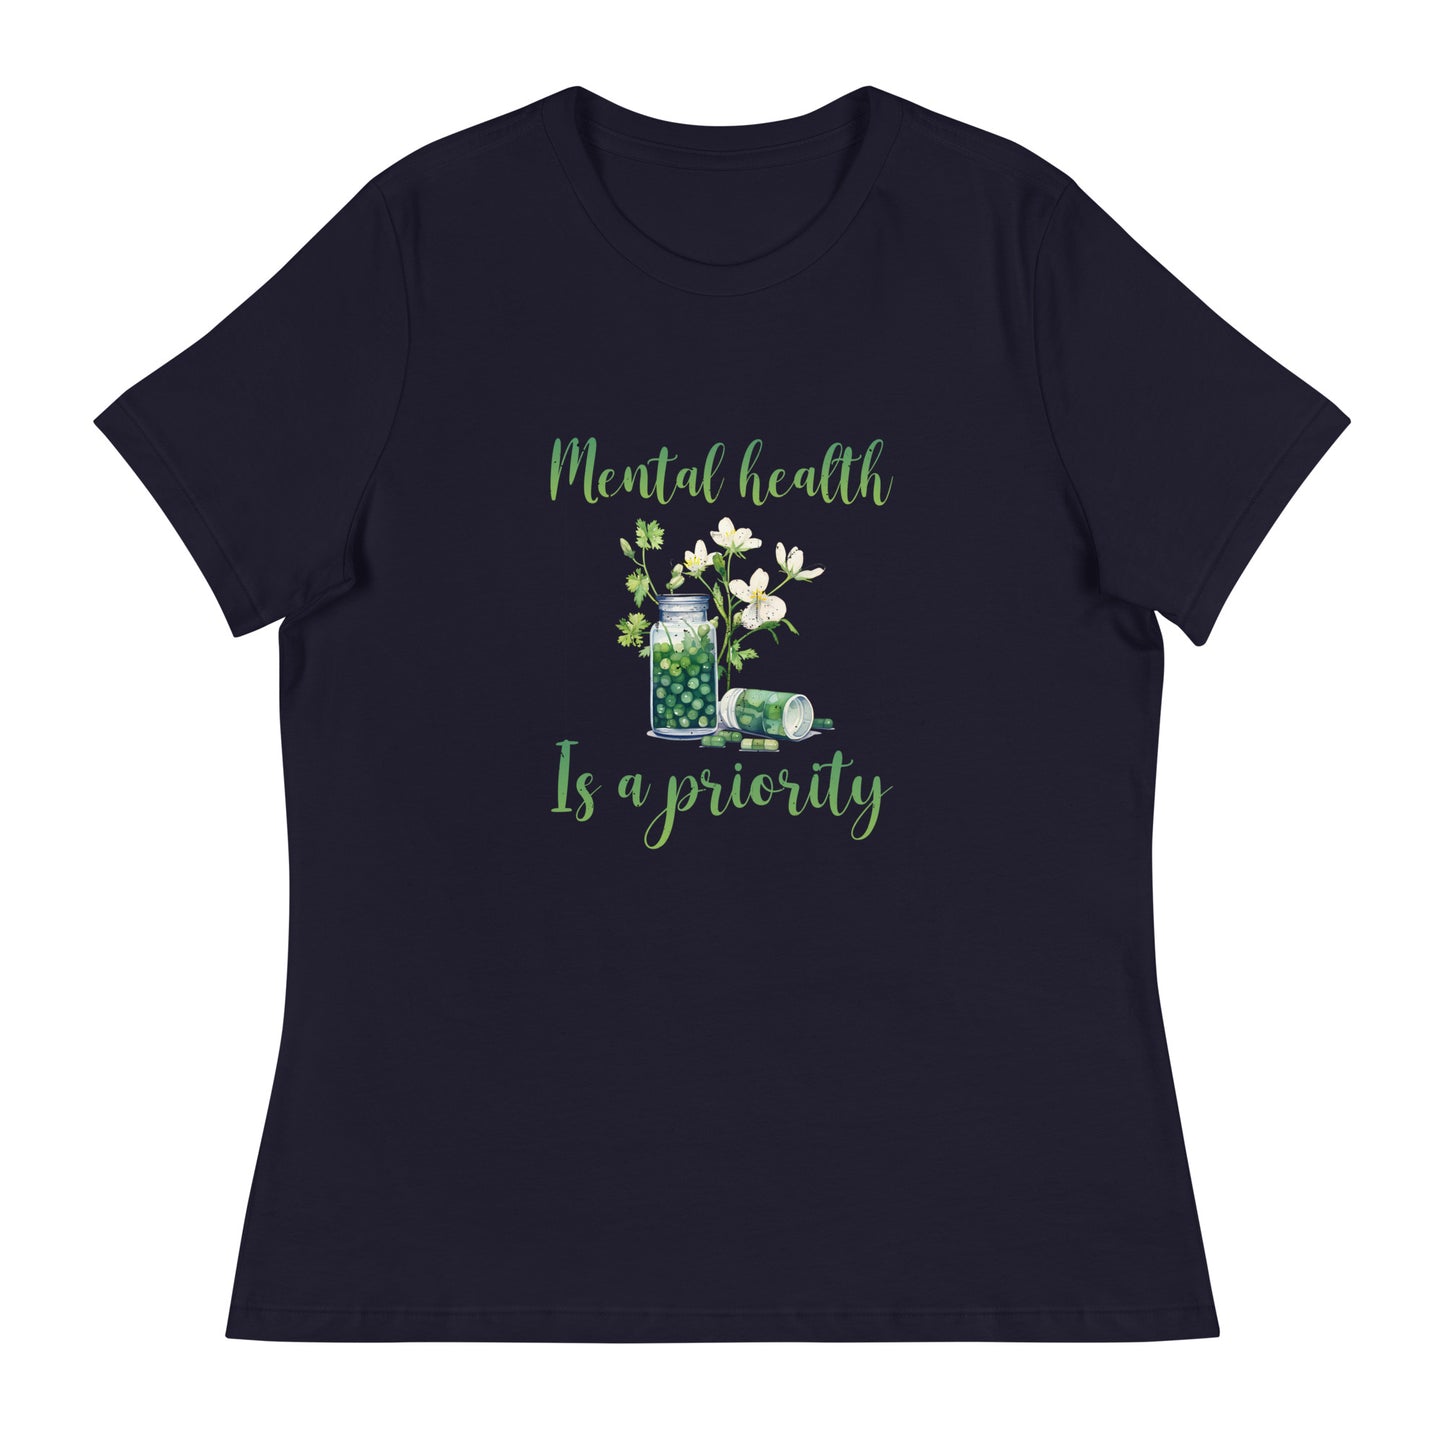 MENTAL HEALTH IS A PRIORITY WOMEN’S RELAXED T-SHIRT